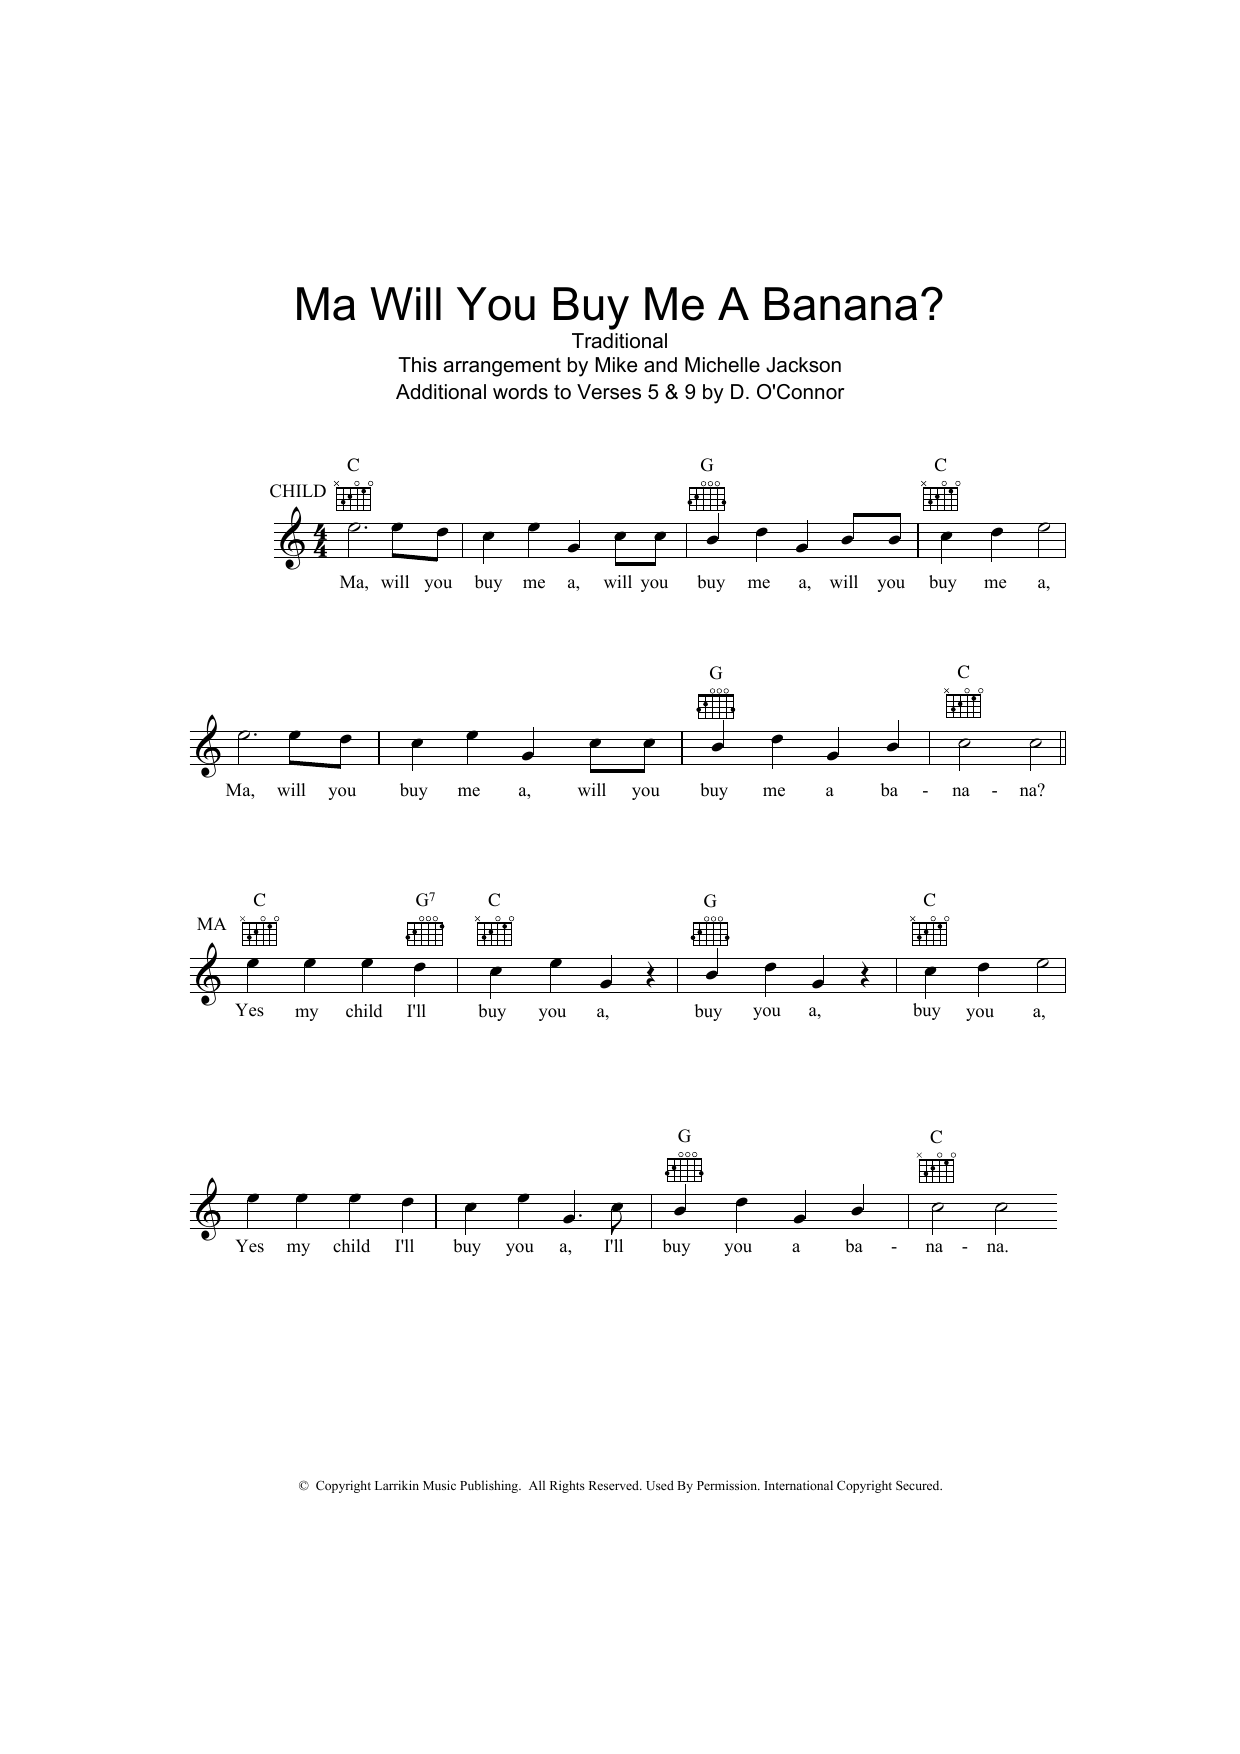 Download Traditional Ma Will You Buy Me A Banana? Sheet Music